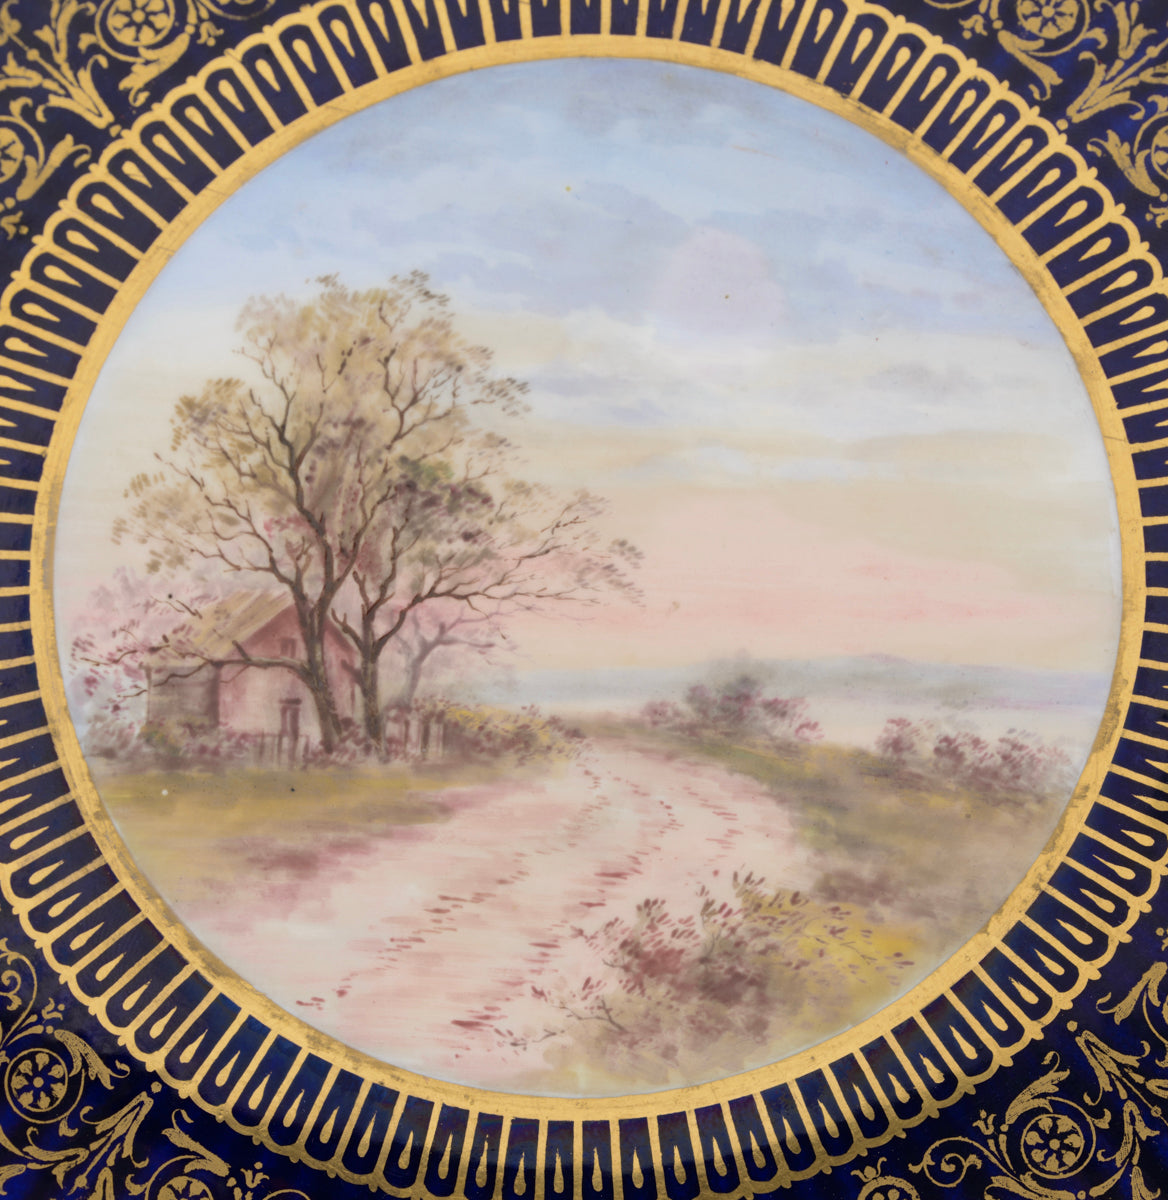 Antique Wedgwood China Hand Painted Tazza With Rural Lane & Wooden House Scene (3135)